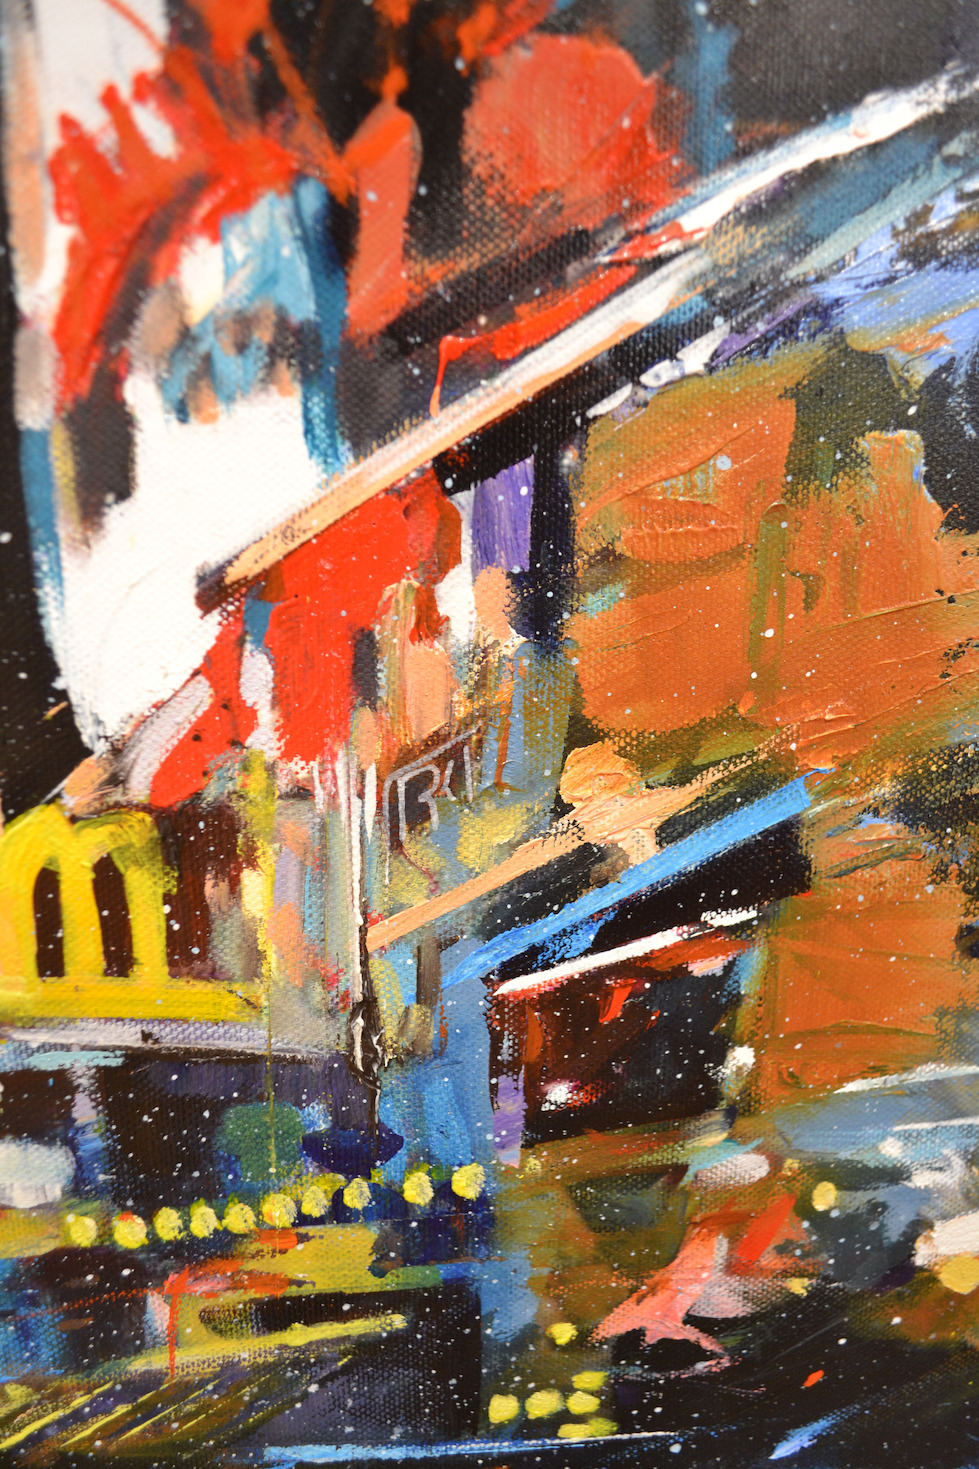 Close Up Detail 1 Of Acrylic Painting "Time Square Vibe" By Judith Dalozzo